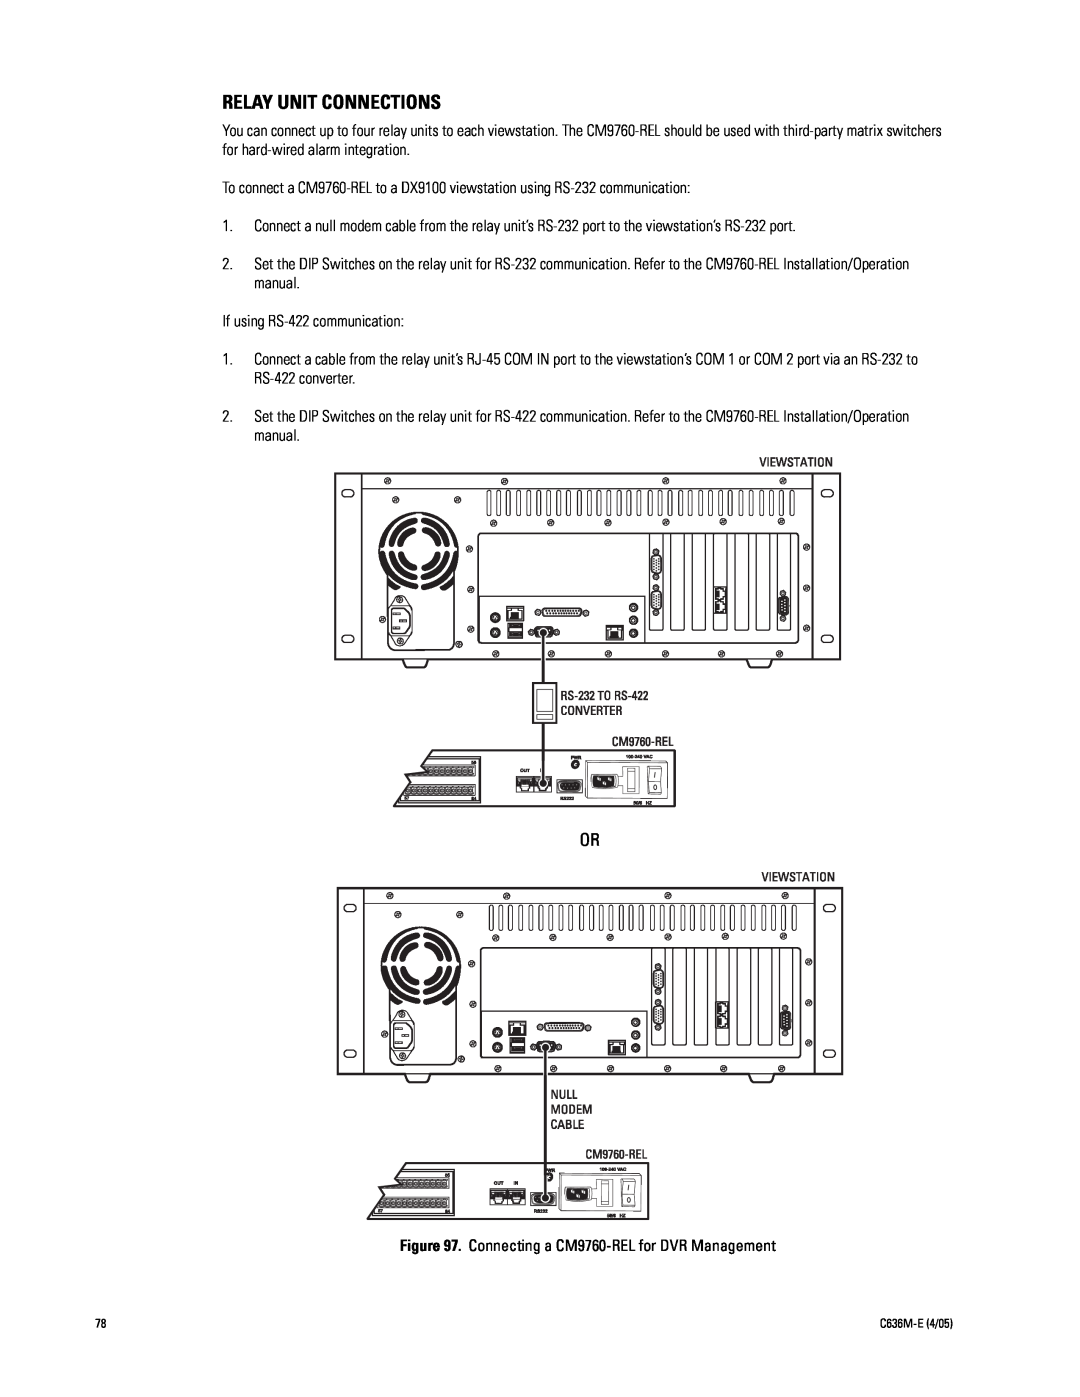 Pelco DX9100 installation manual Relay Unit Connections 